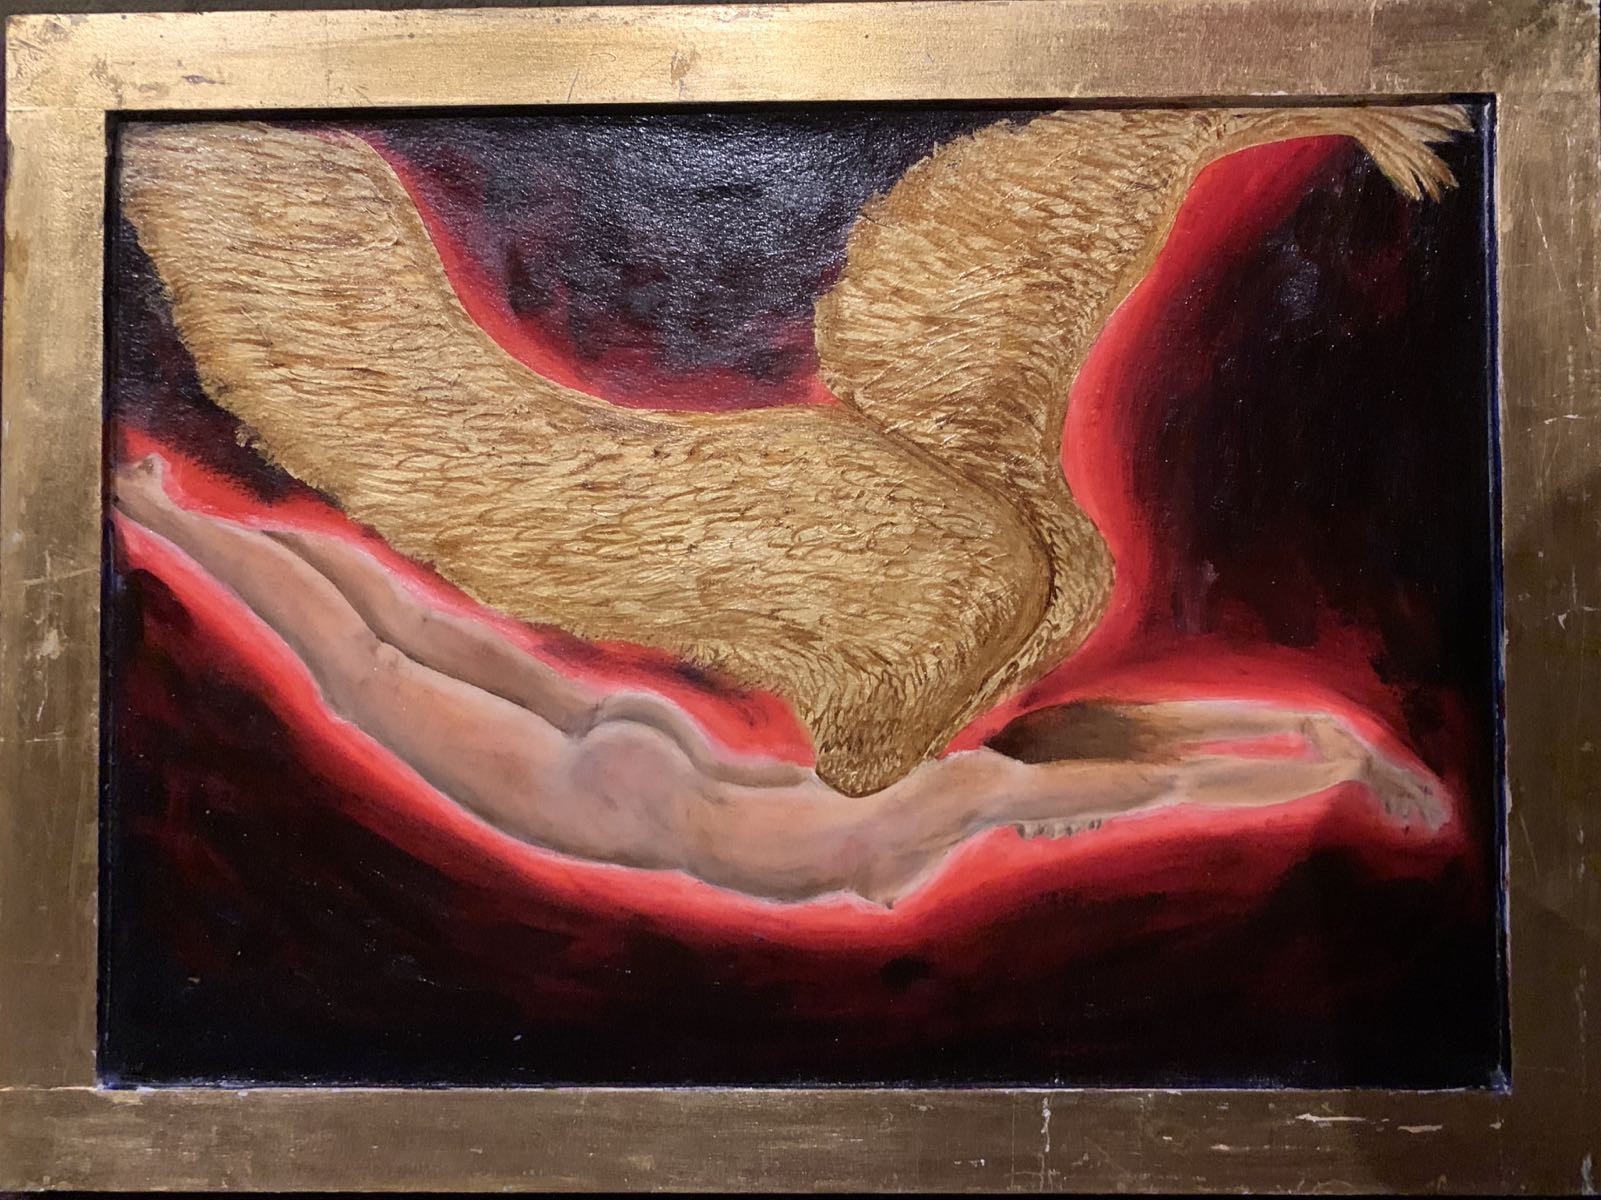 red angel - 18 inches x 24 inches - oil on wood panel with gold leaf - $200